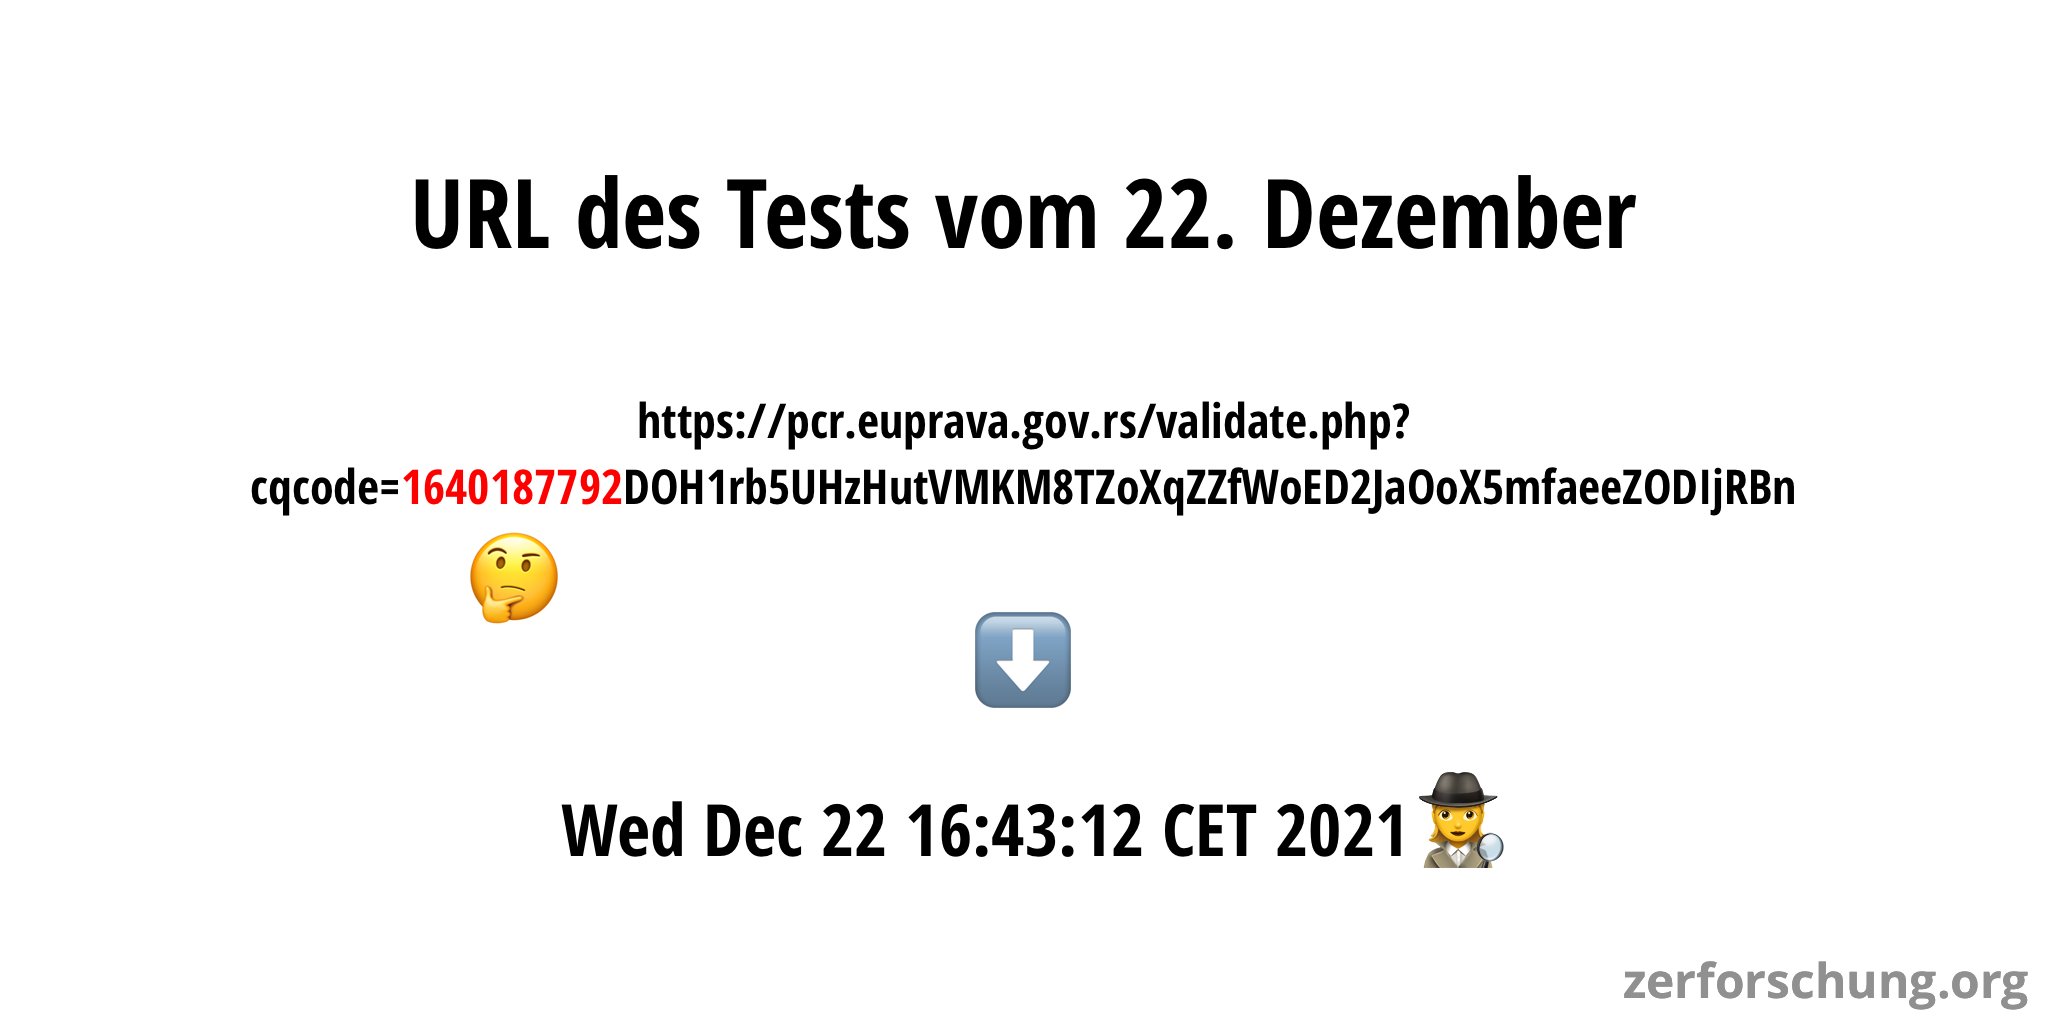 URL to the verification website of the December 22 test, with the timestamp section highlighted, as well as the human-readable representation: Wed, Dec 22 16:43:12 CET 2021